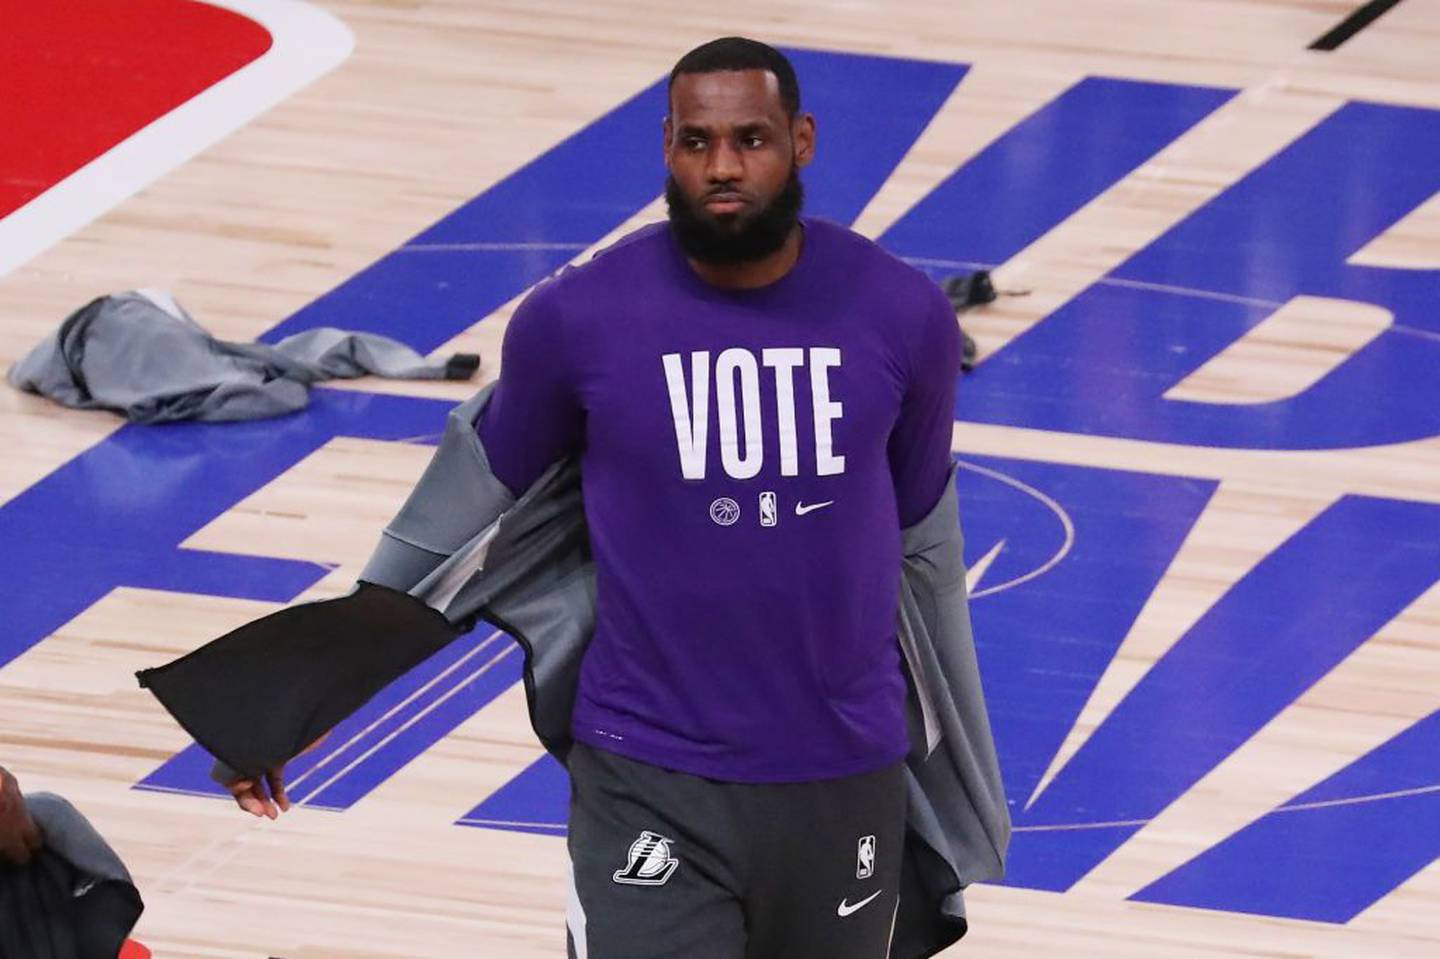 LeBron James #23 of the Los Angeles Lakers wears a VOTE shirt during warm-up prior to the start of the game against the Miami Heat in Game Five of the 2020 NBA Finals at AdventHealth Arena at the ESPN Wide World Of Sports Complex on October 9, 2020 in Lake Buena Vista, Florida.